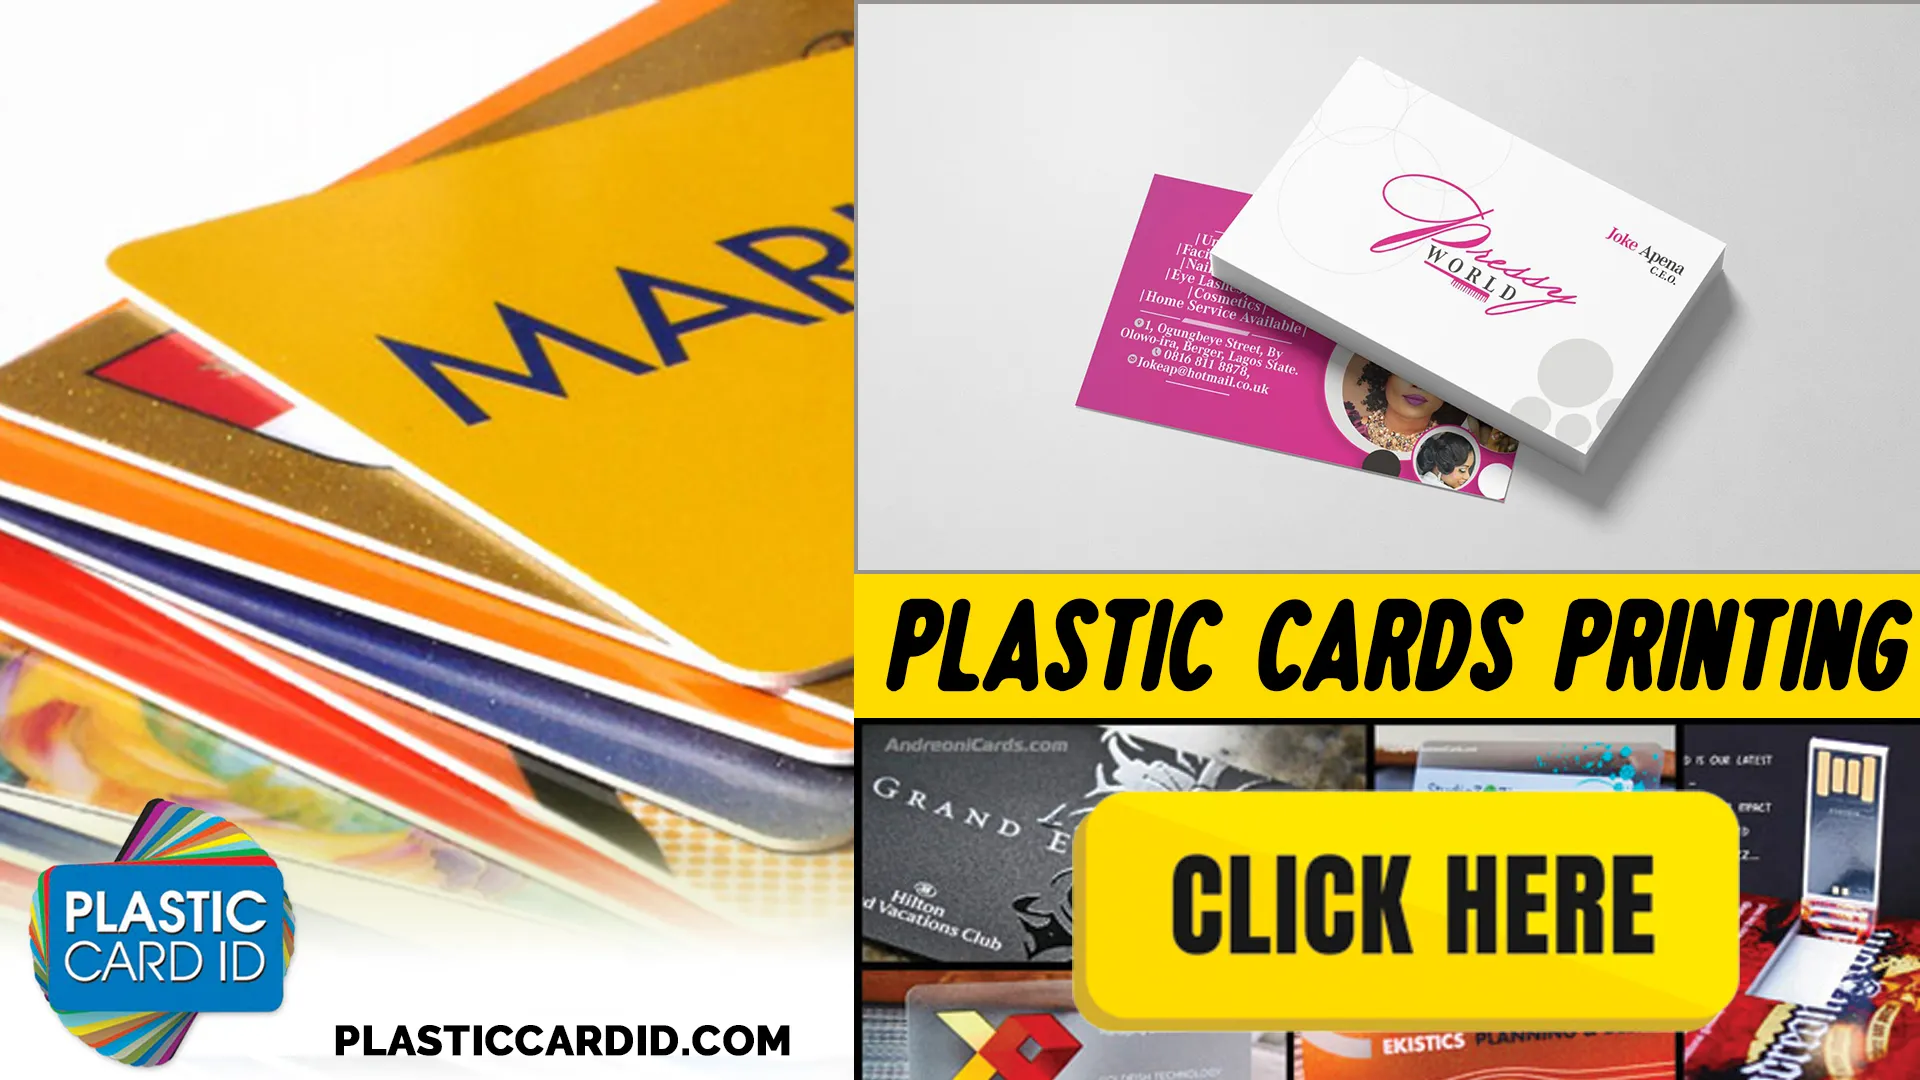 The Secret Sauce to Plastic Card ID
's Success: Personalization